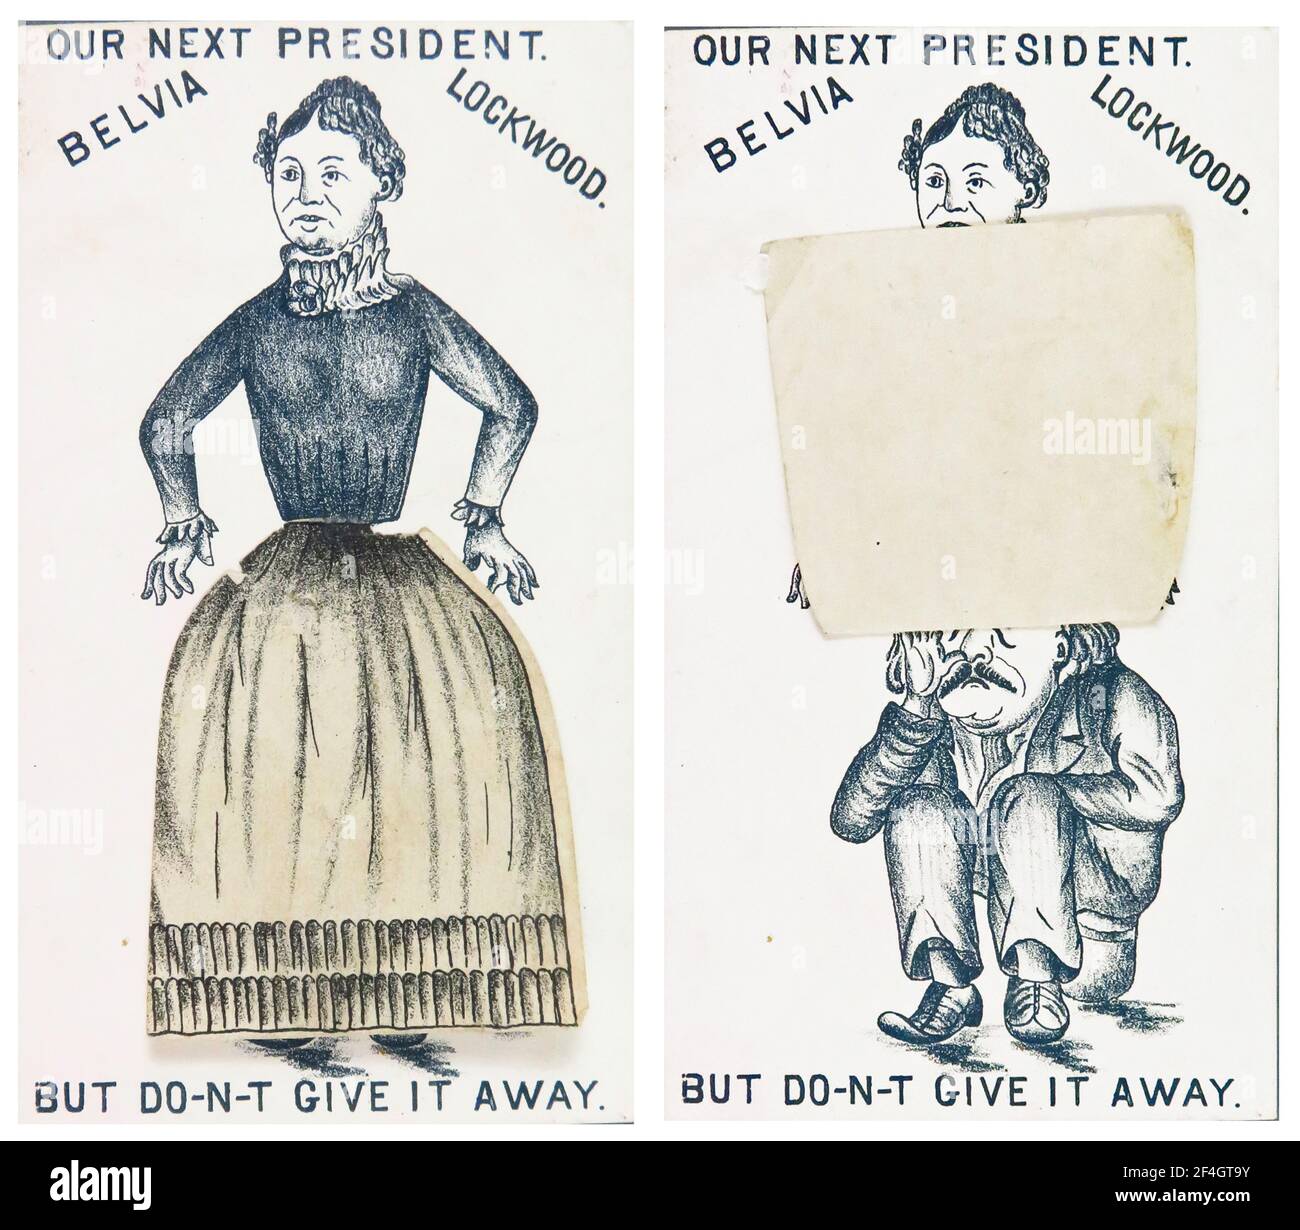 Two images of a Belva Lockwood trade card or ink blotter, with a skirt that lifts to reveal politician Benjamin Butler, and the text 'Our Next President, Belvia Lockwood, But Do-n-t Give It Away, ' published for the American market, 1884. Photography by Emilia van Beugen. () Stock Photo